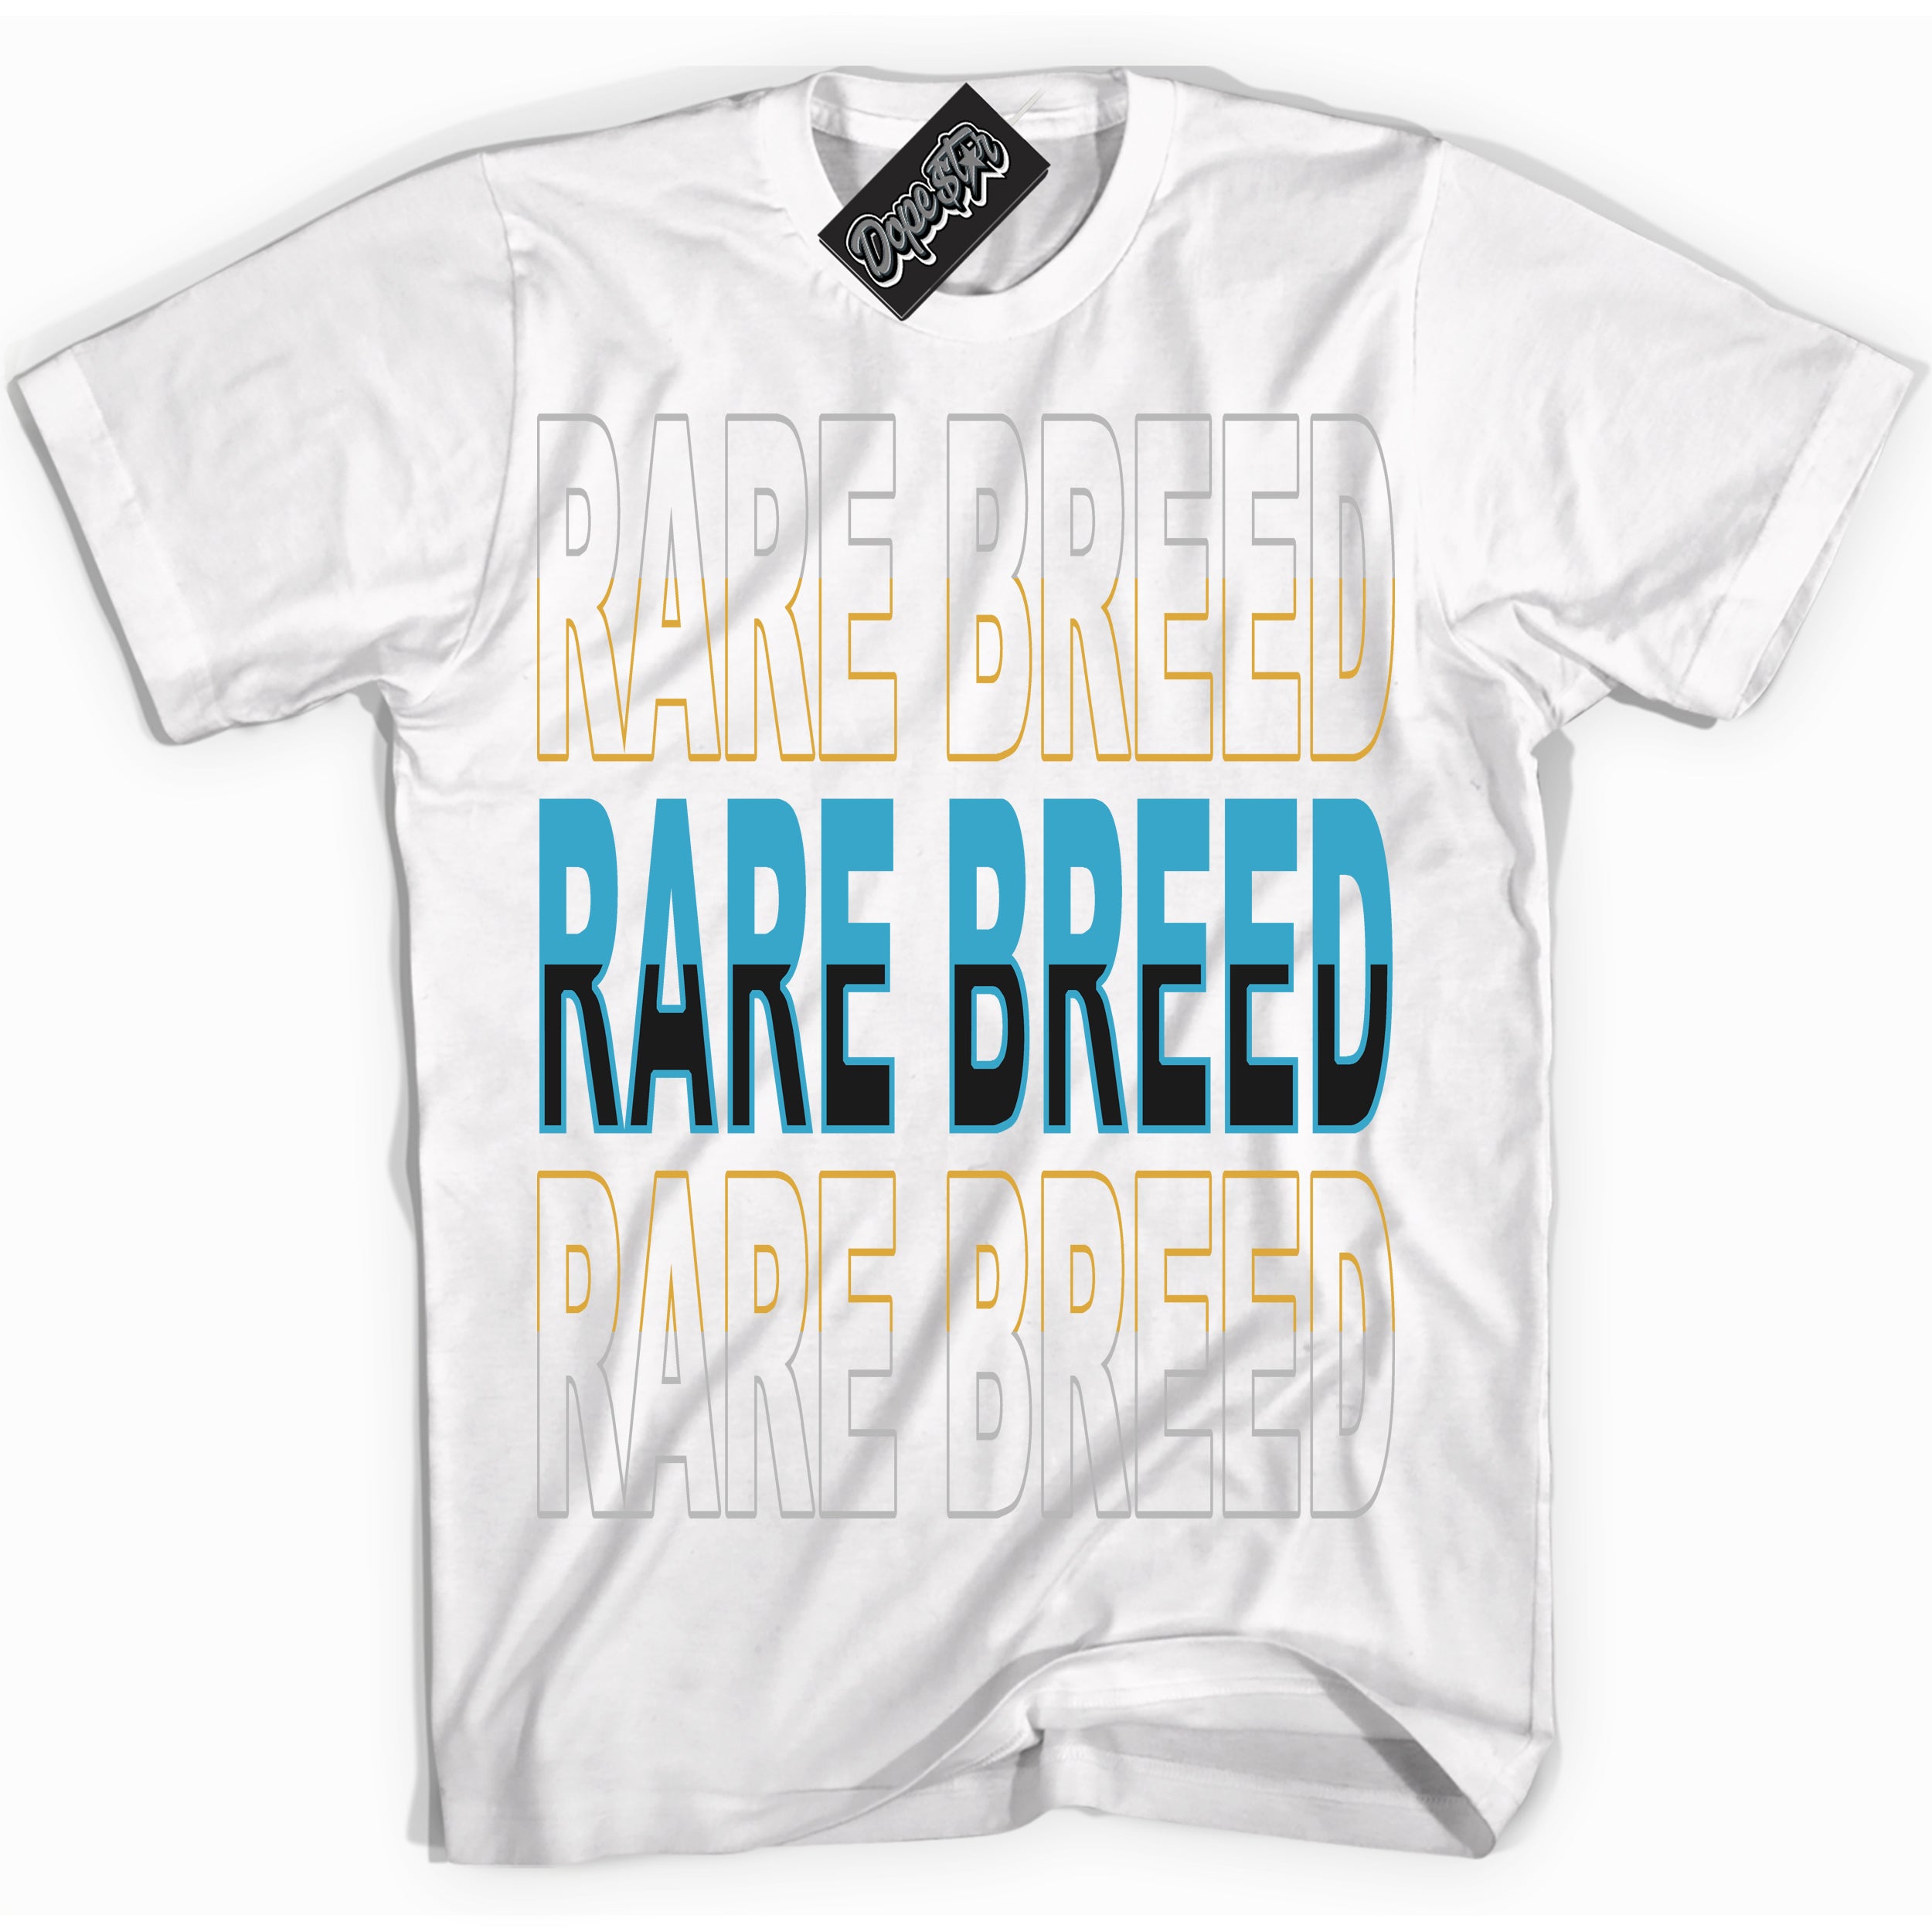 Cool White Shirt with “ Rare Breed” design that perfectly matches Aqua 5s Sneakers.